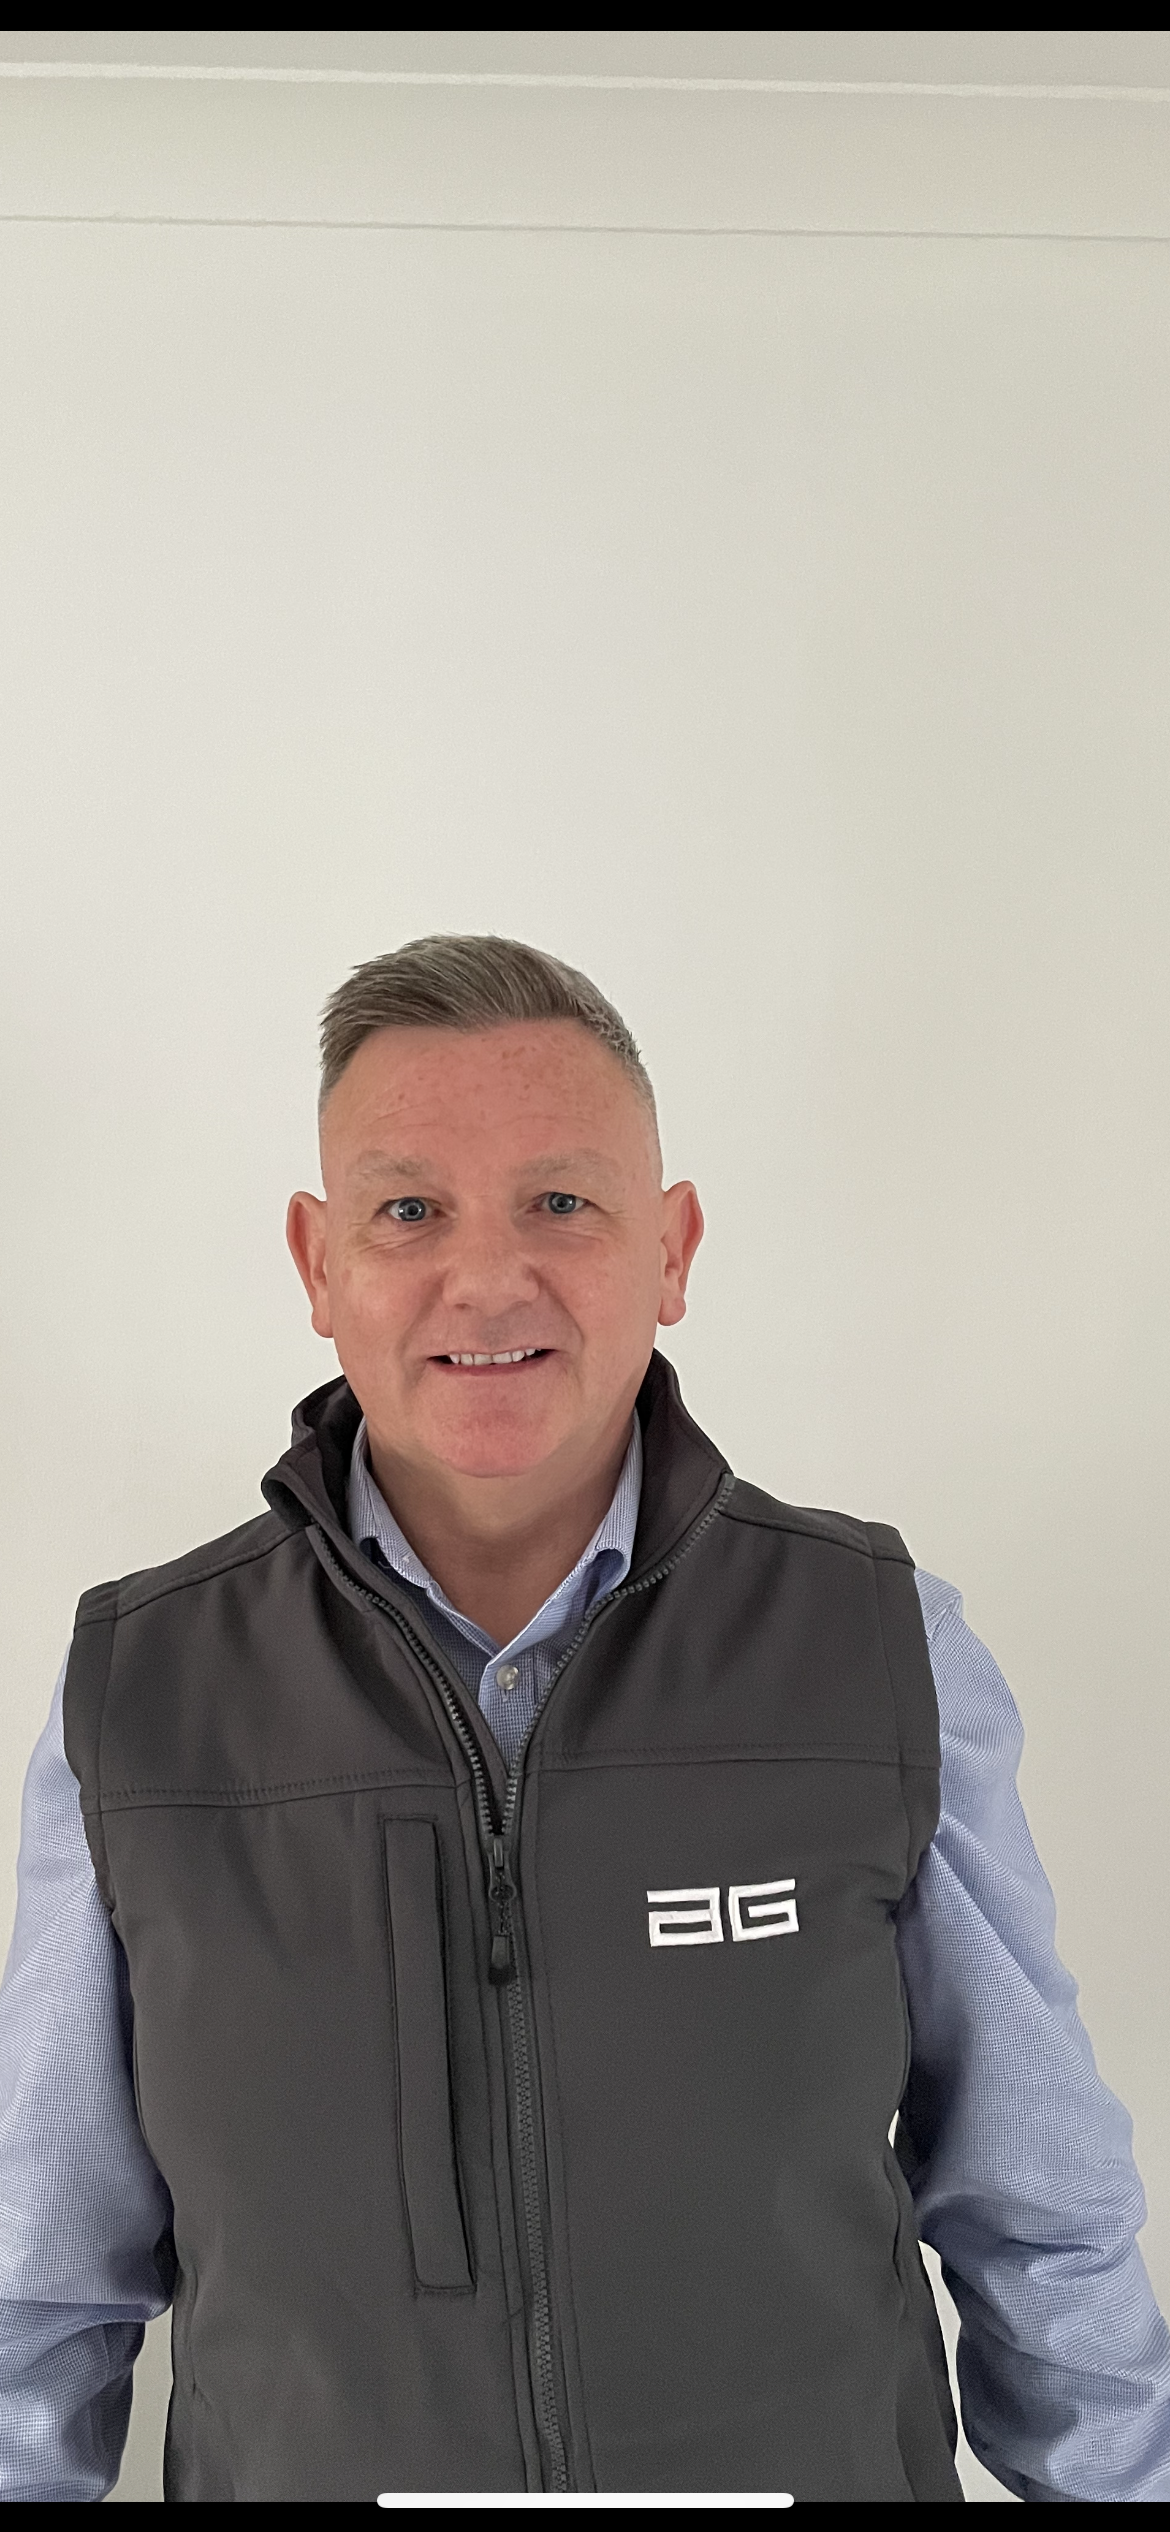 Paving and building products specialist AG names new head of sales in Scotland